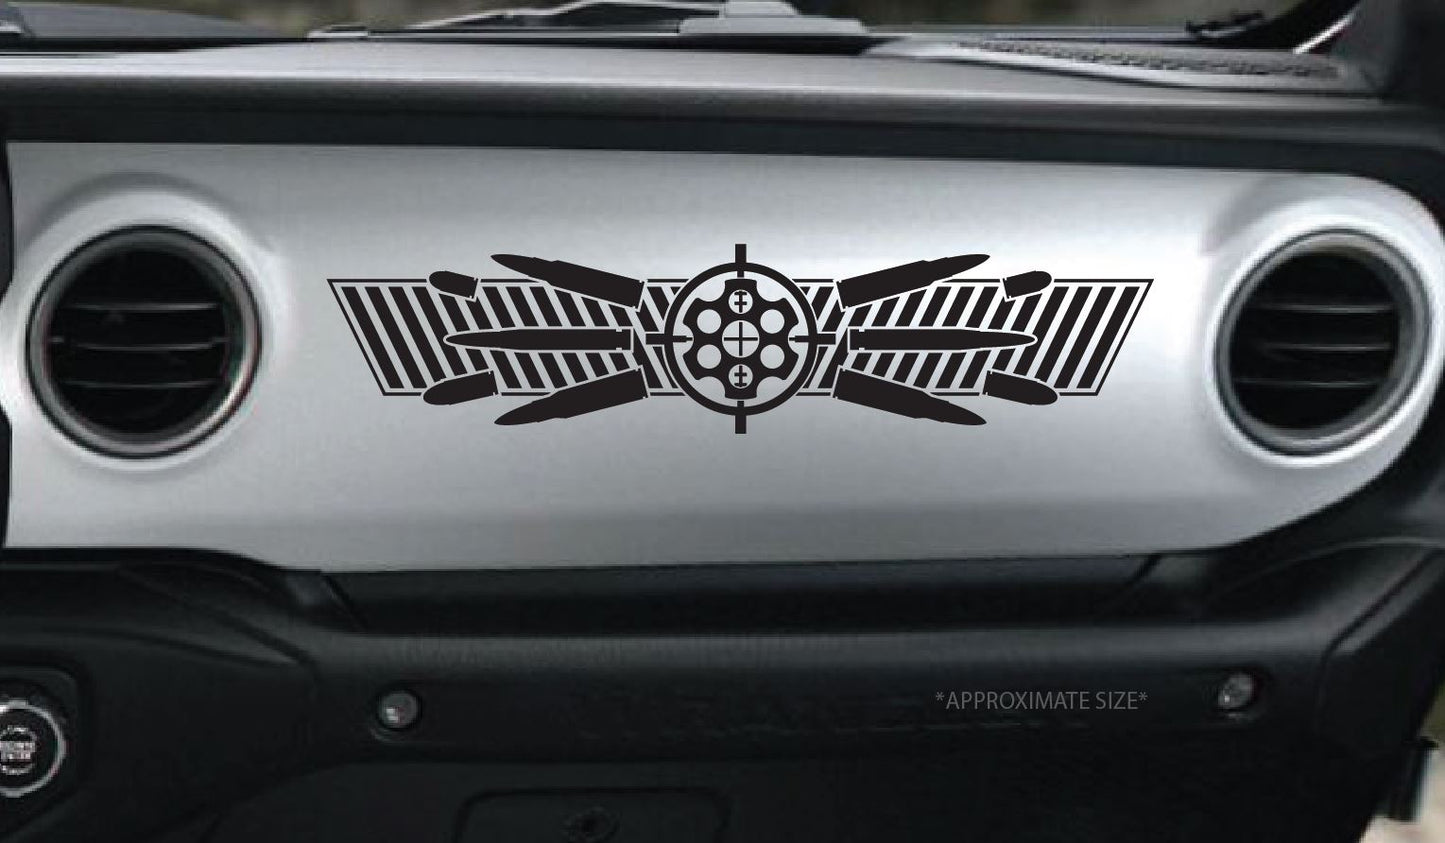 Gun & Bullet Theme Dash Decal- Designed to fit on JL & Gladiator, Bronco Dashes and More